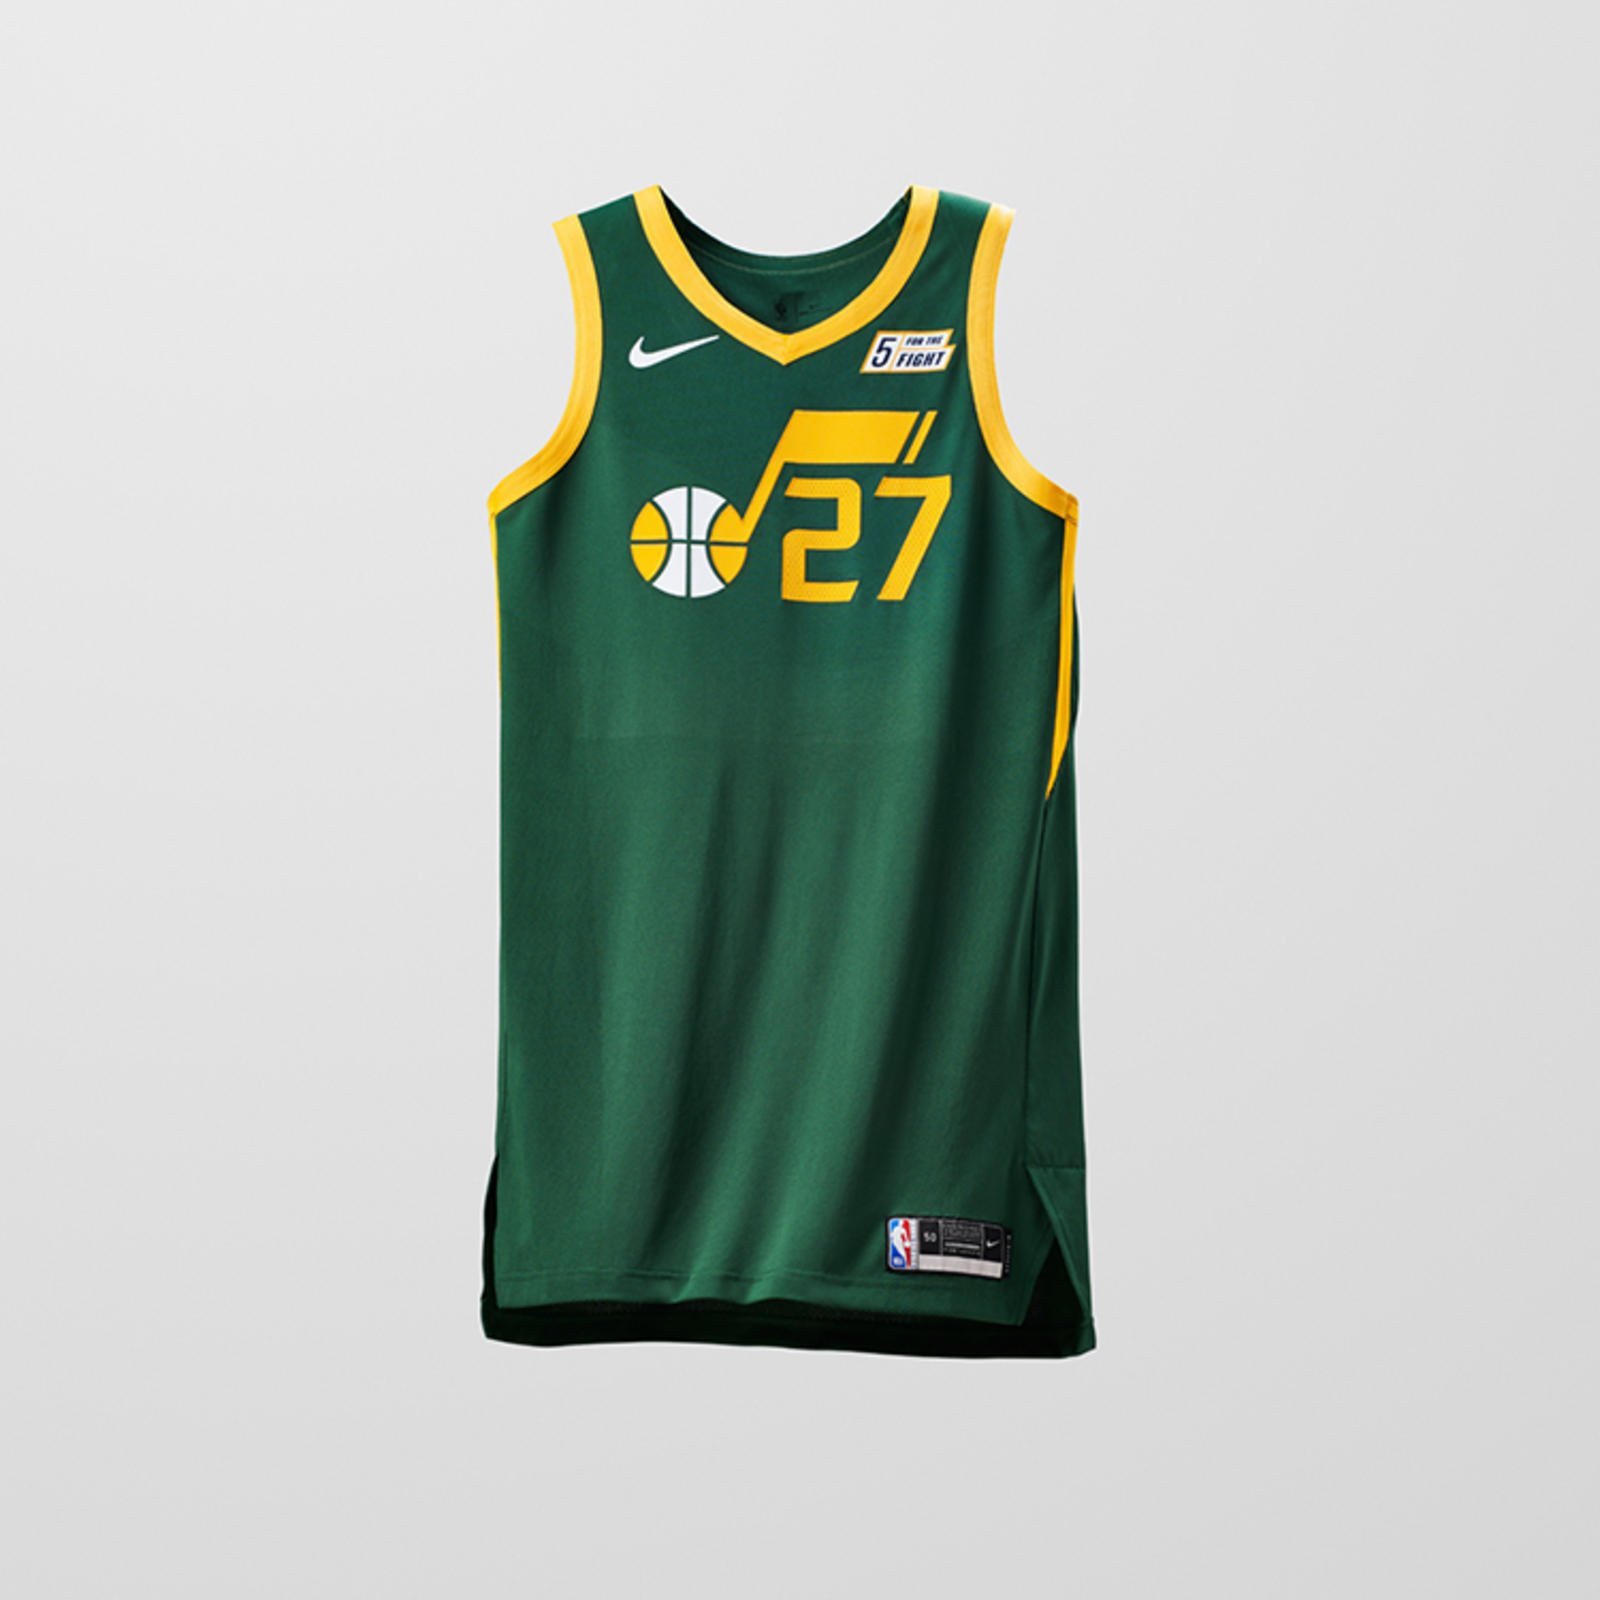 Utah Jazz reveal which kits they'll rock for each game in 2018-19